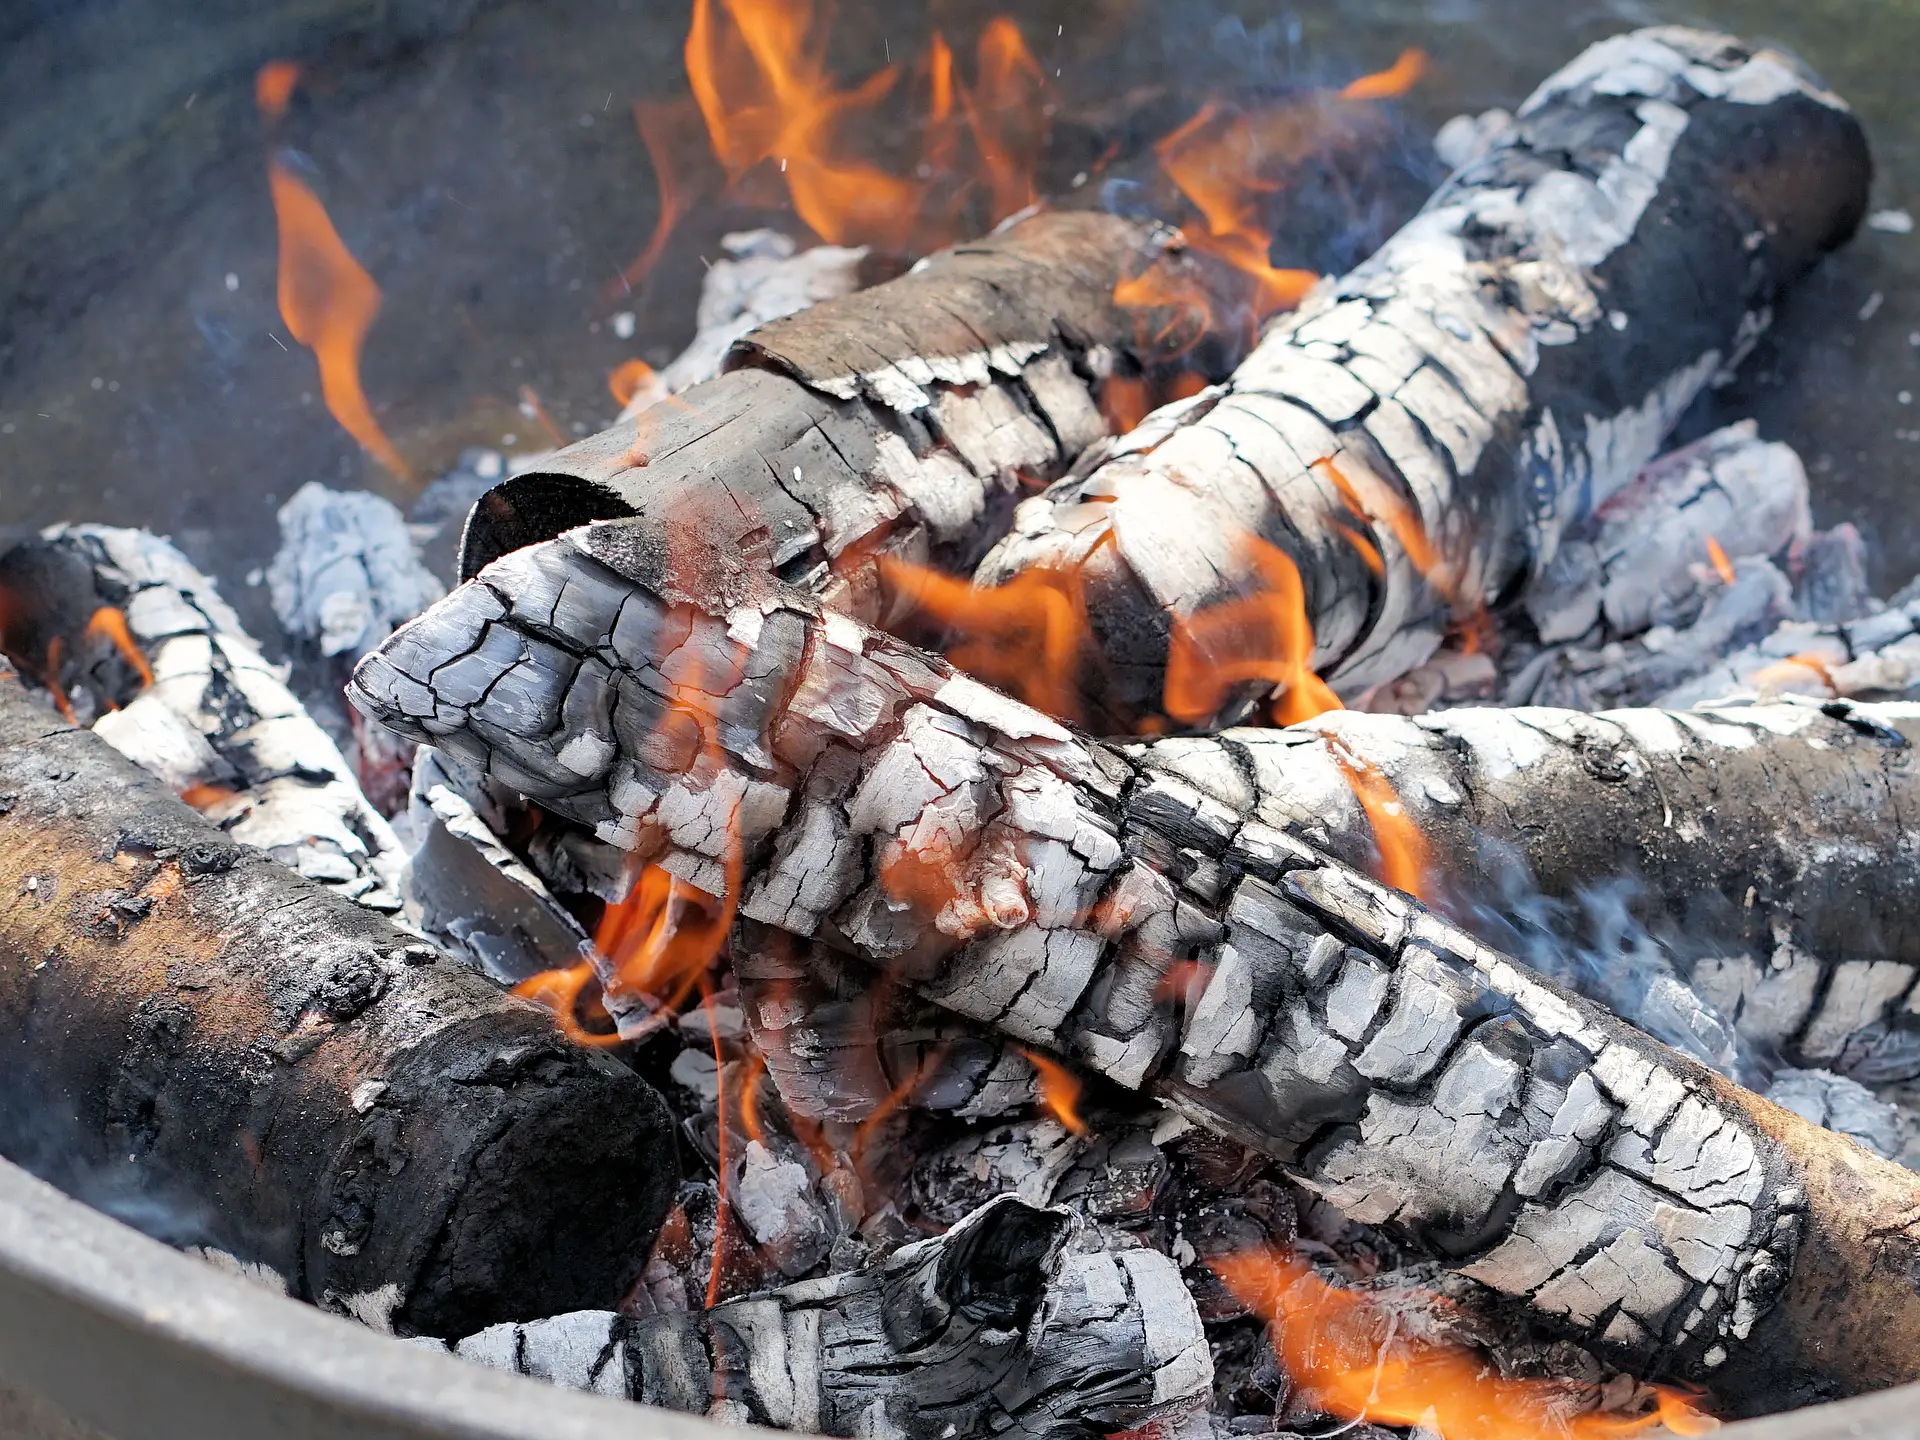 How To Start A Wood Burning Fire Pit, Best Way To Start A Fire In A Fire Pit